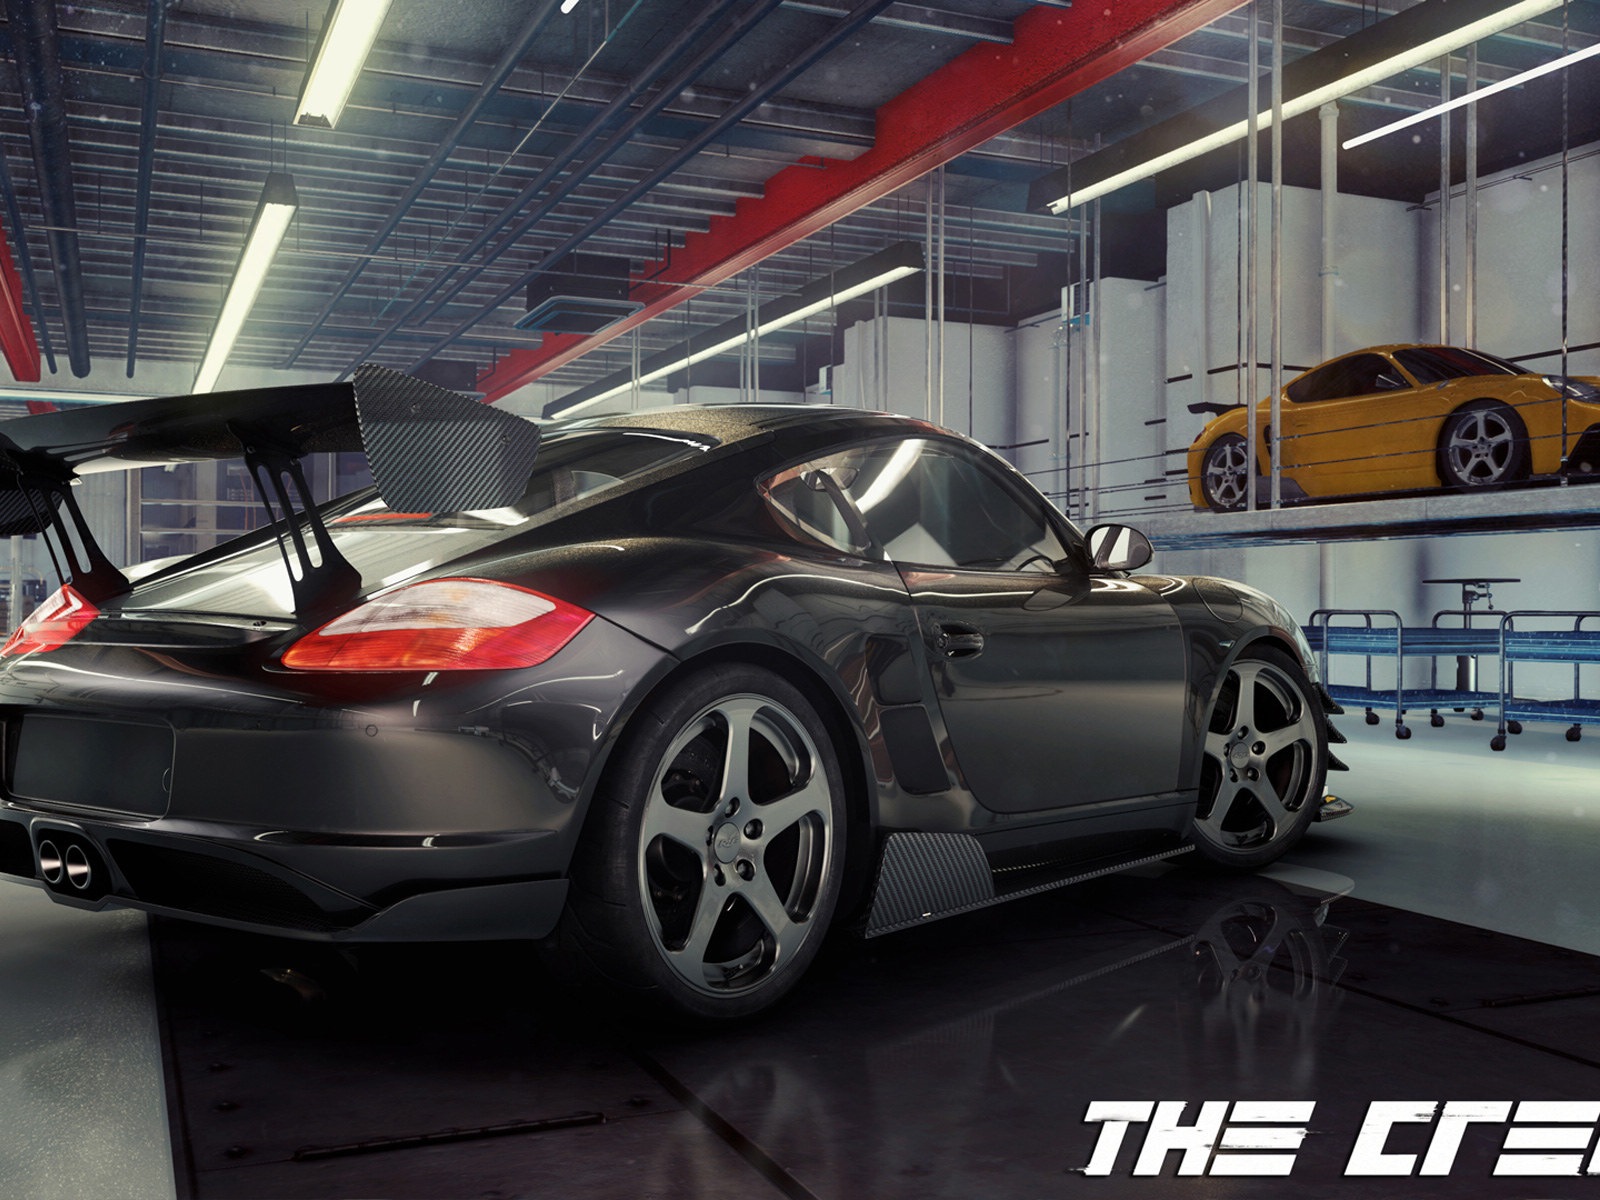 The Crew game HD wallpapers #7 - 1600x1200